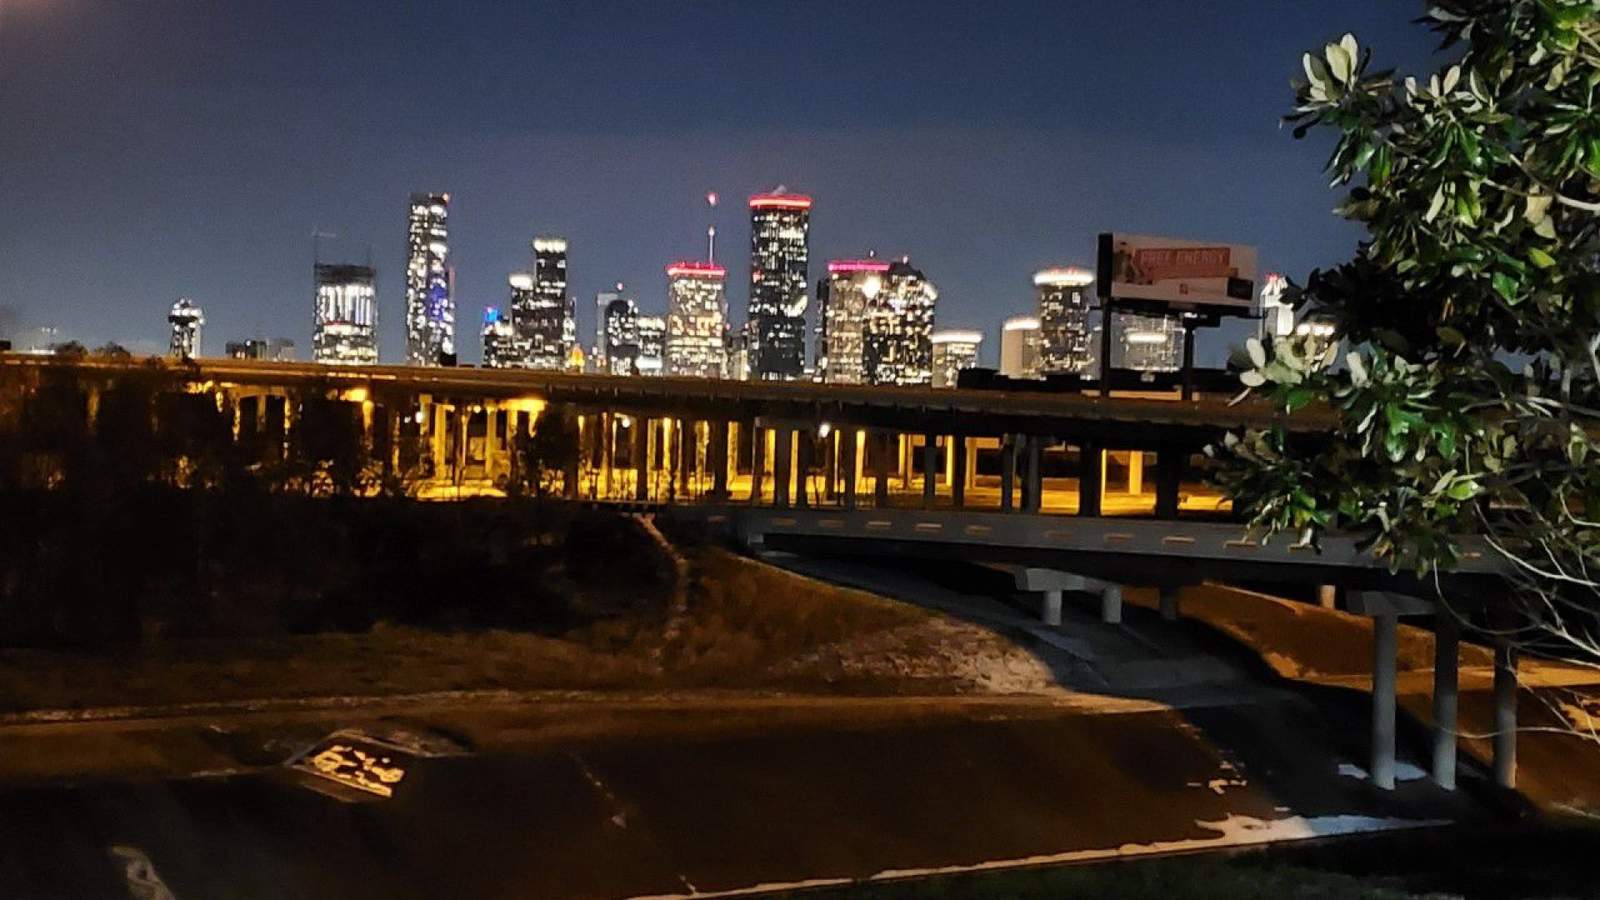 Frustration expressed over images of downtown Houston lit up during major winter power outage